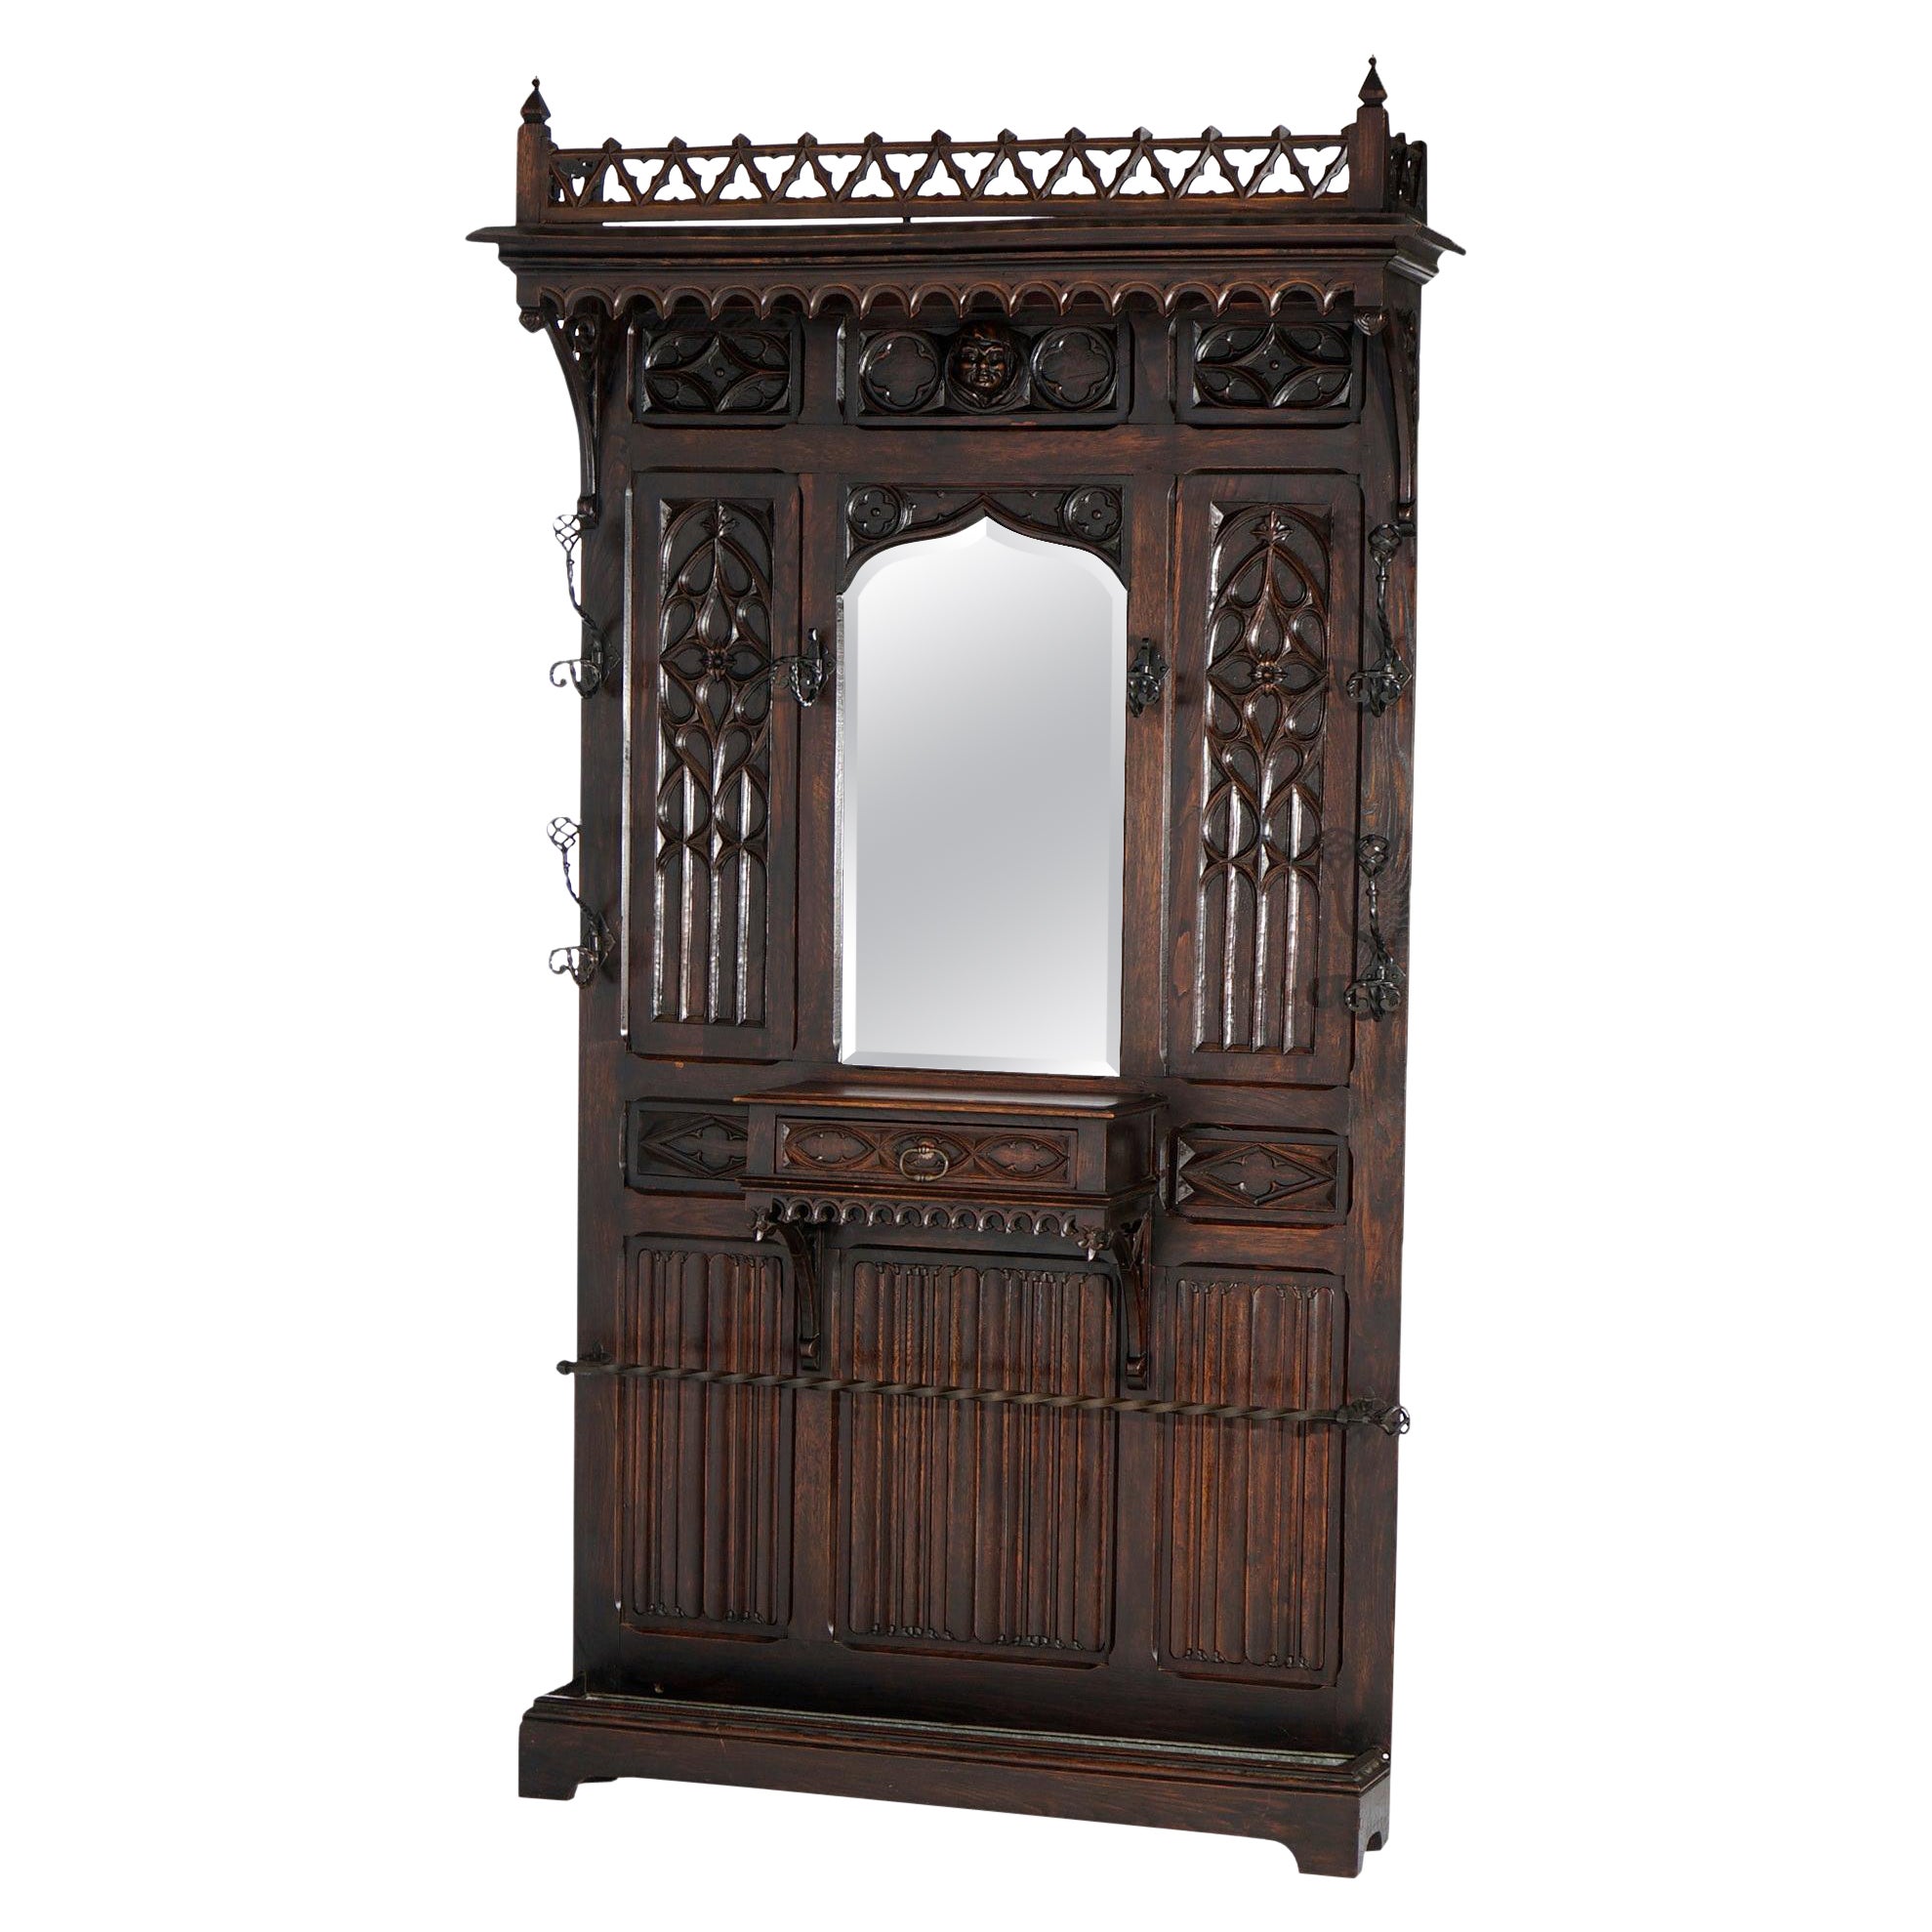 Large Antique Gothic Revival Figural Carved English Oak Hall Mirror, c1900 For Sale